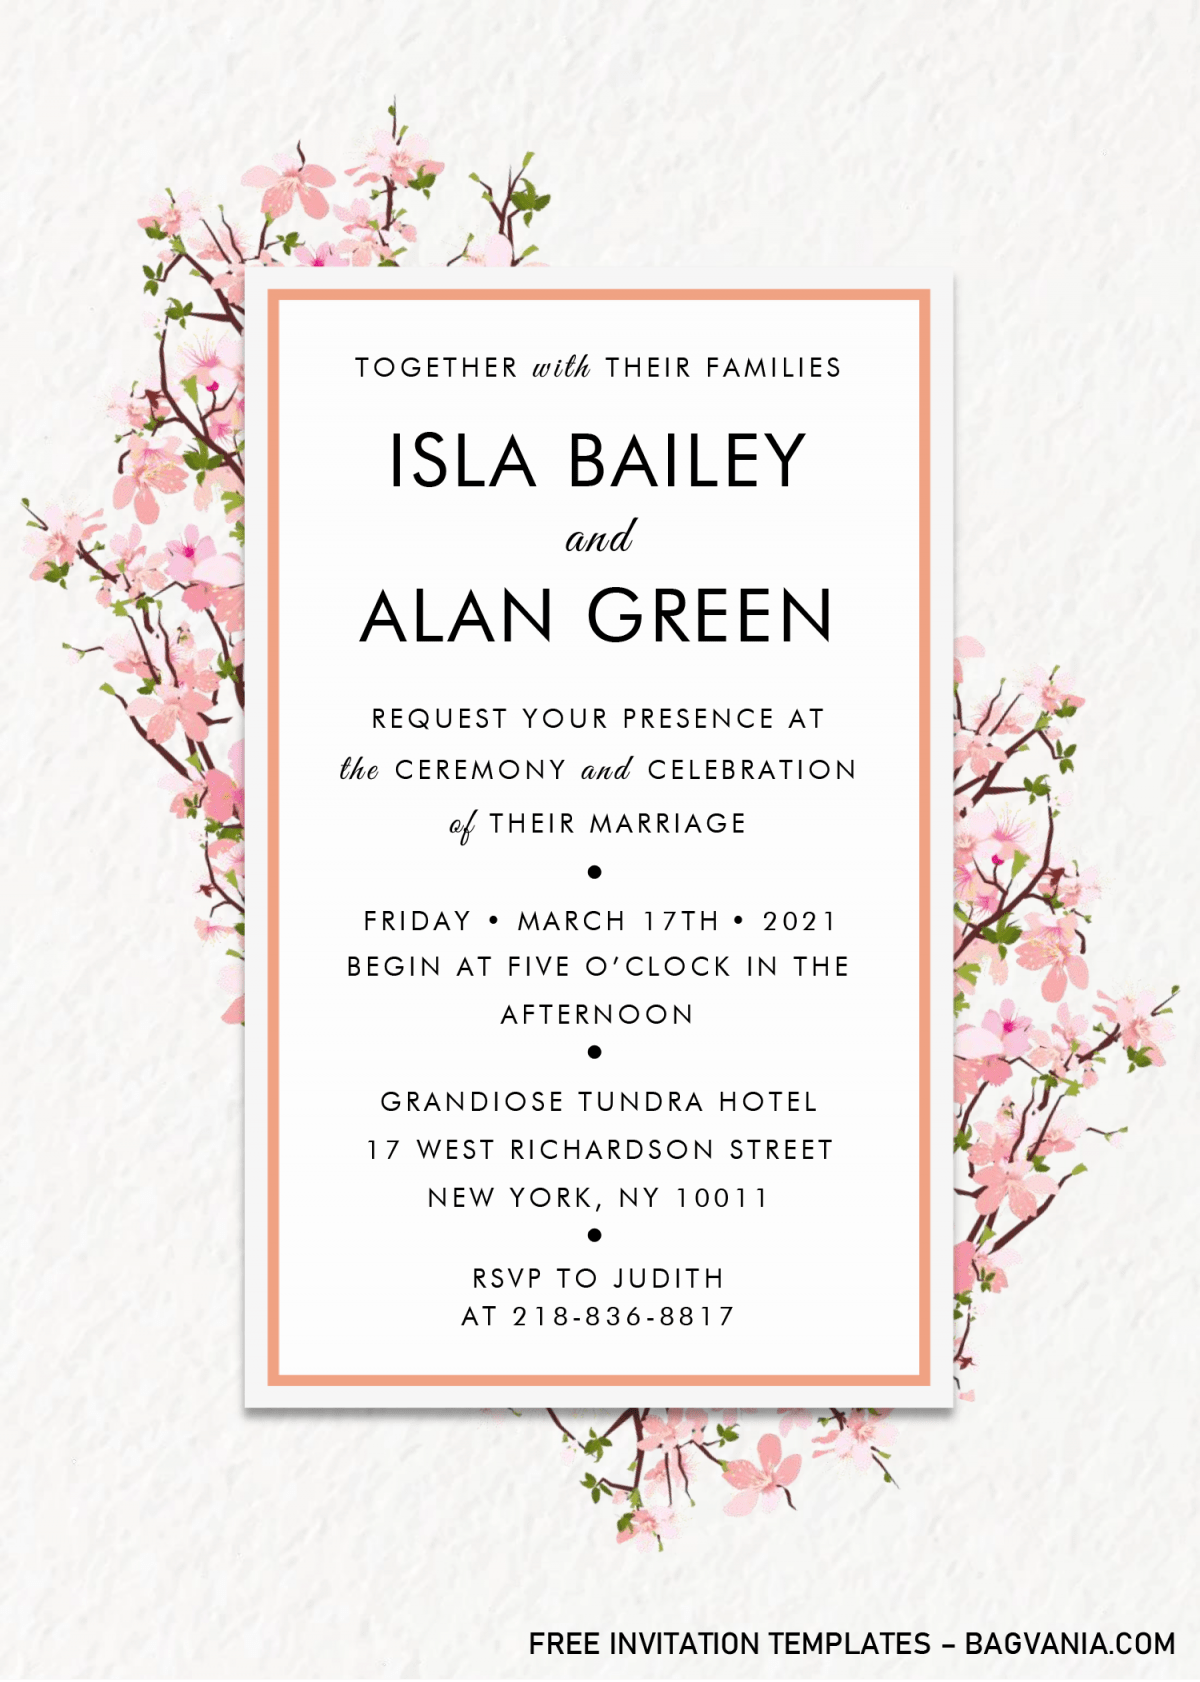 Modern Floral Invitation Templates - Editable With MS Word and has paper grain background